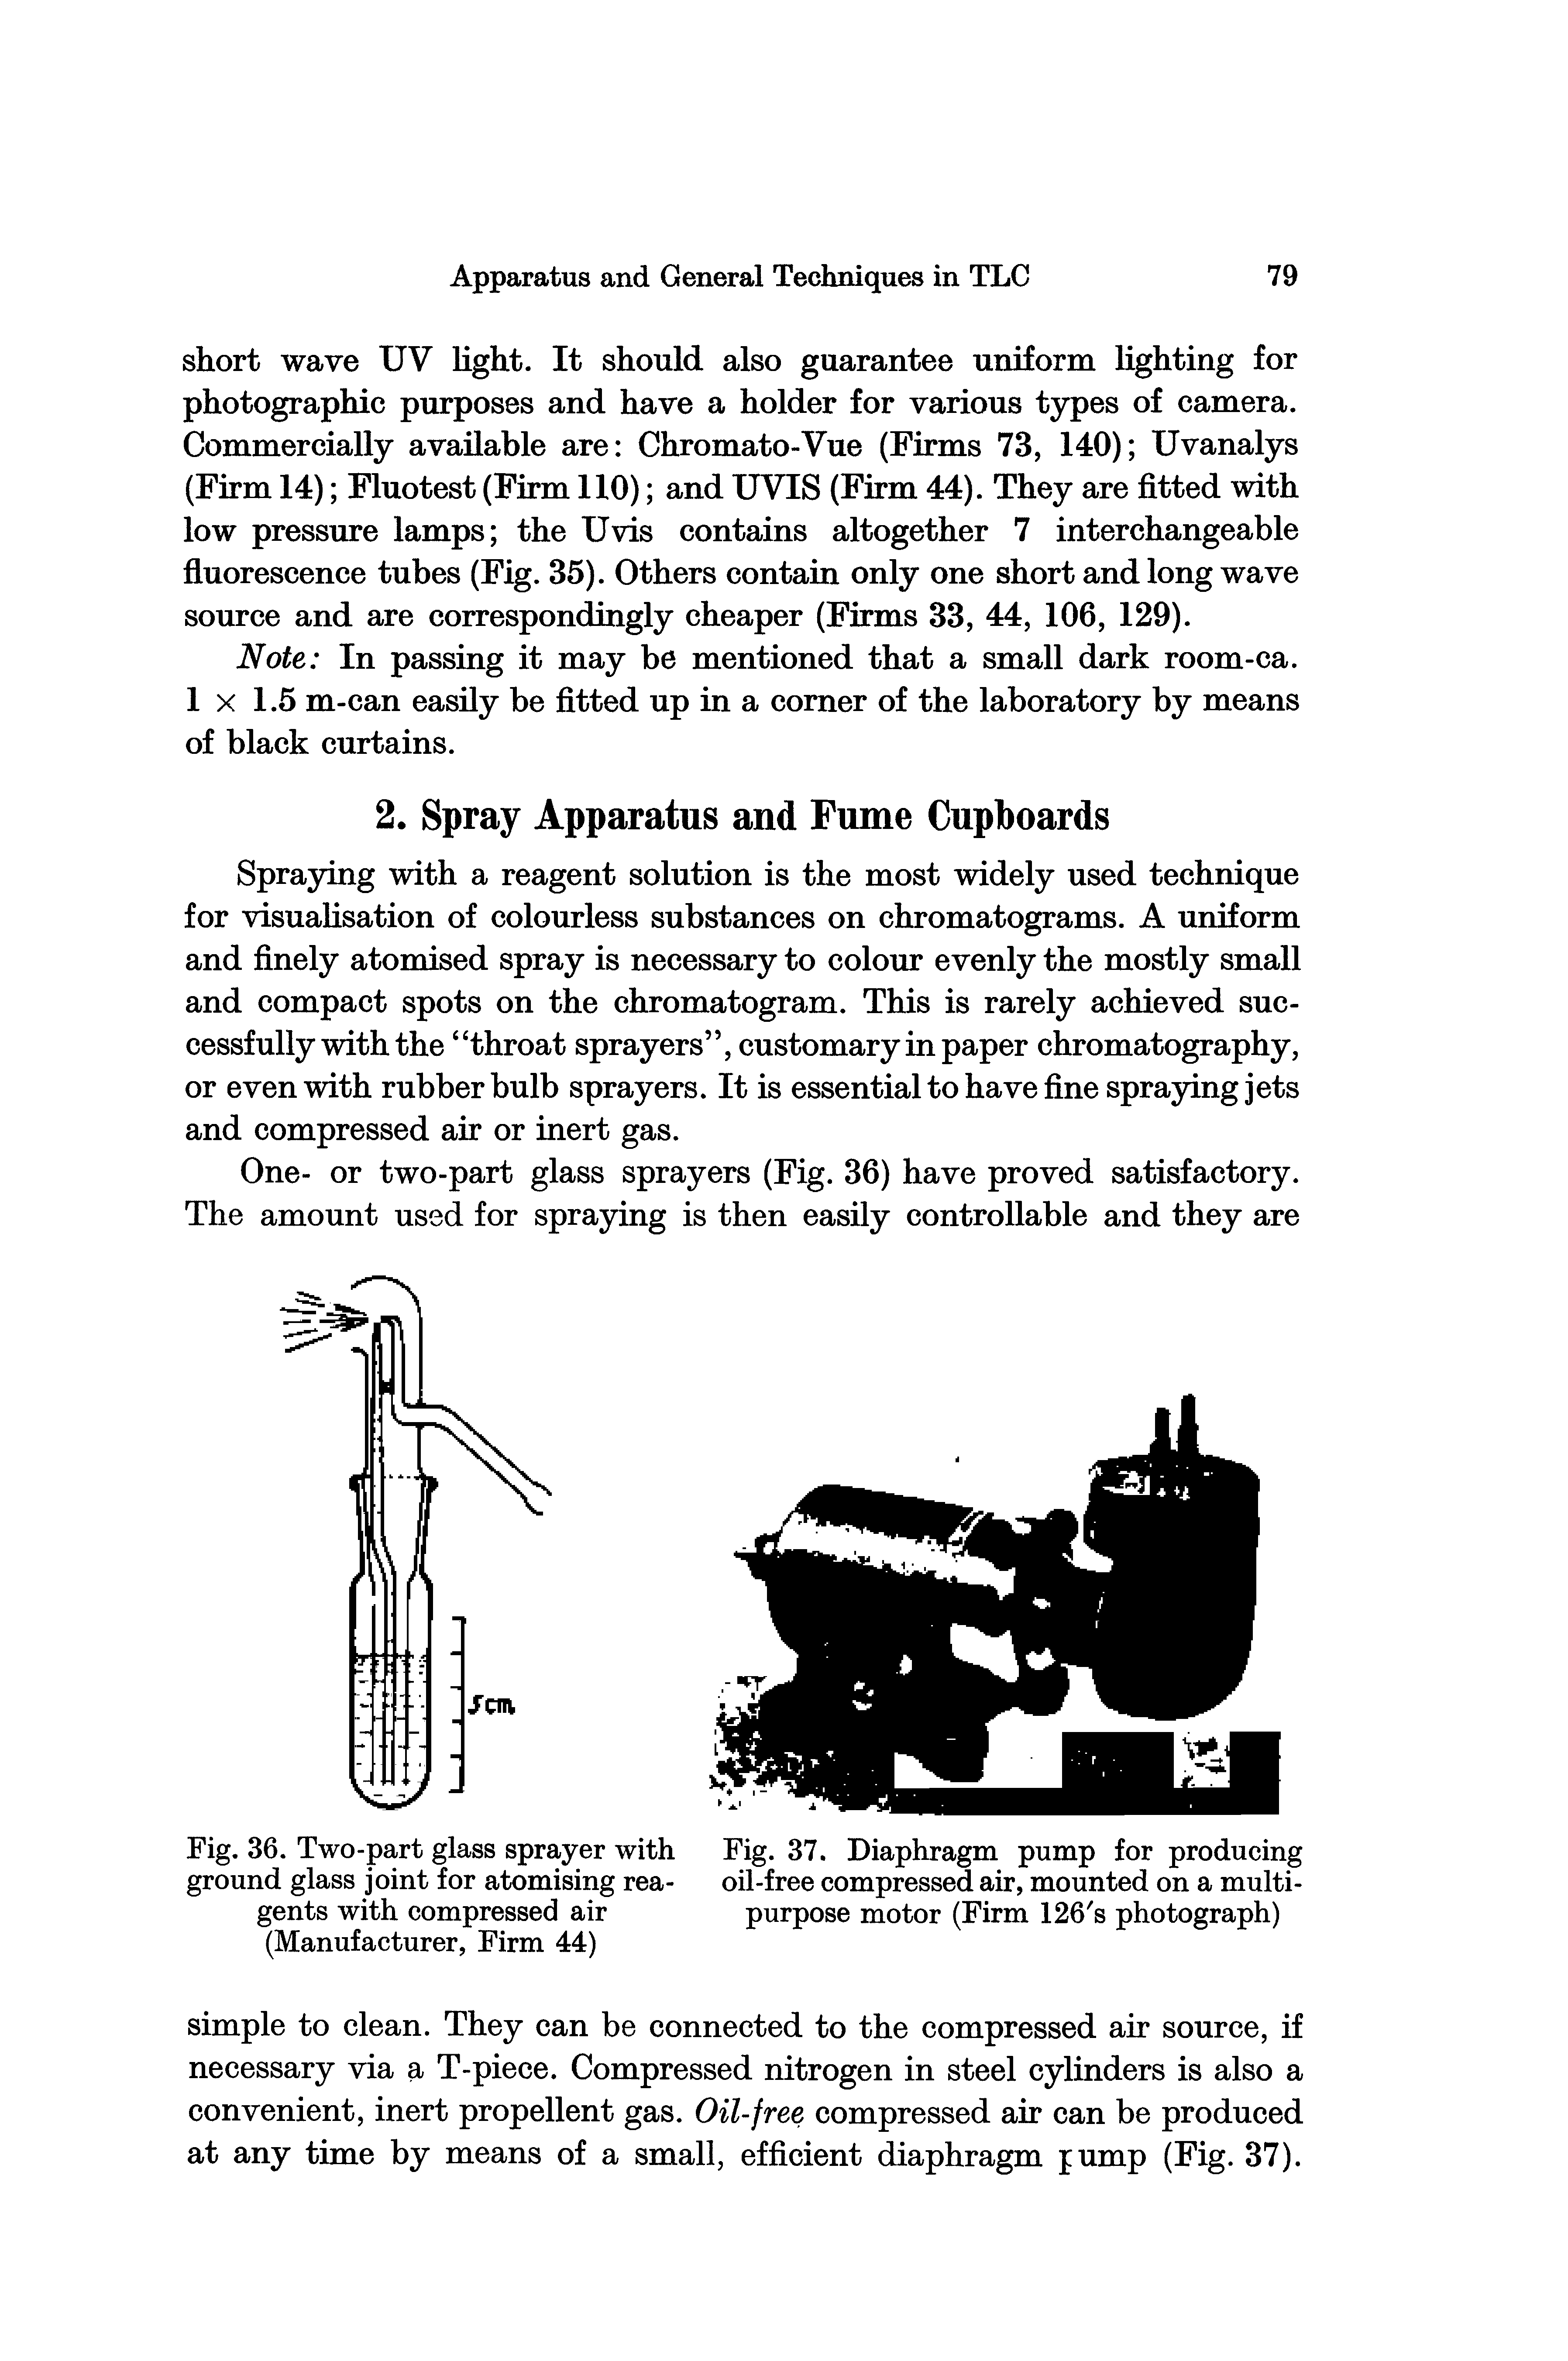 Fig. 37. Diaphragm pump for producing oil-free compressed air, mounted on a multipurpose motor (Firm 126 s photograph)...